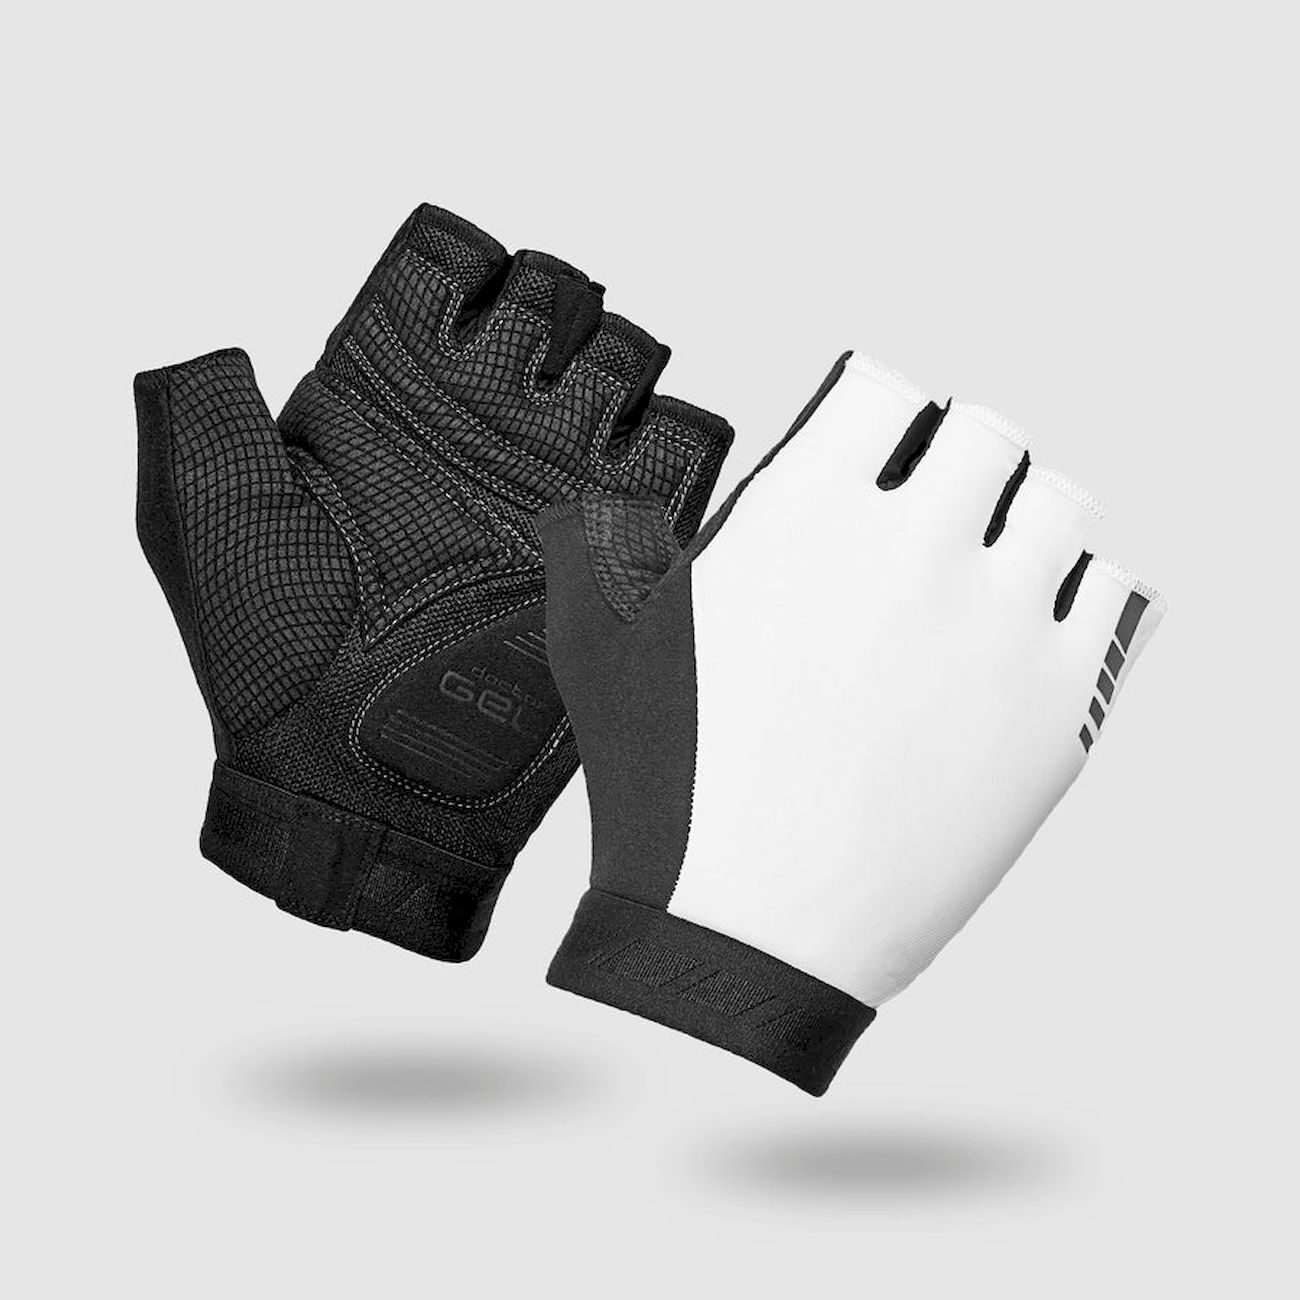 Grip Grab WorldCup Padded Gloves - Guantes cortos ciclismo - Hombre